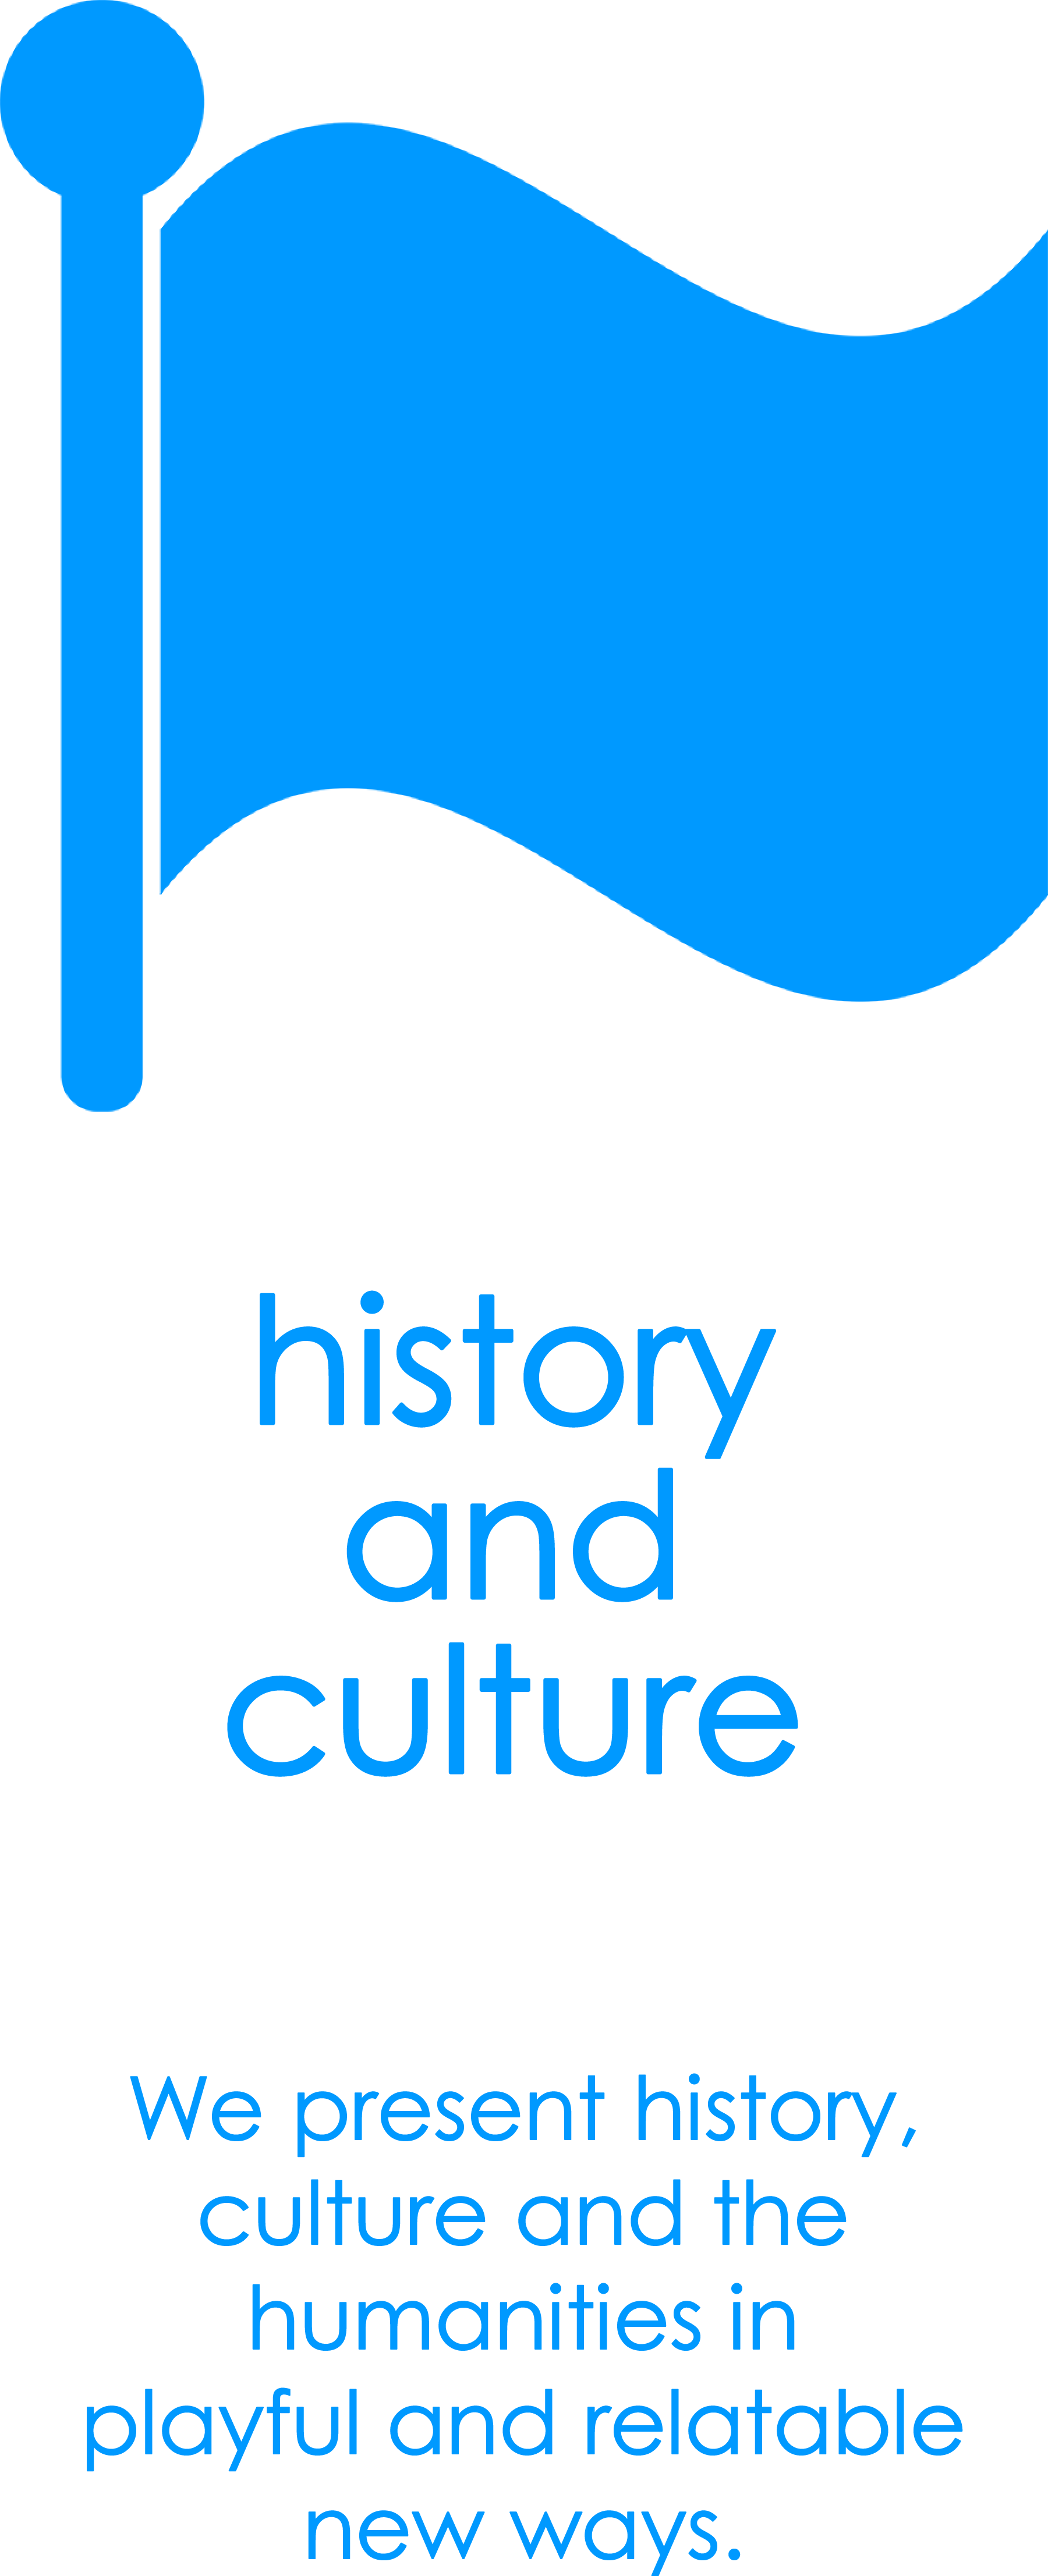 history and culture